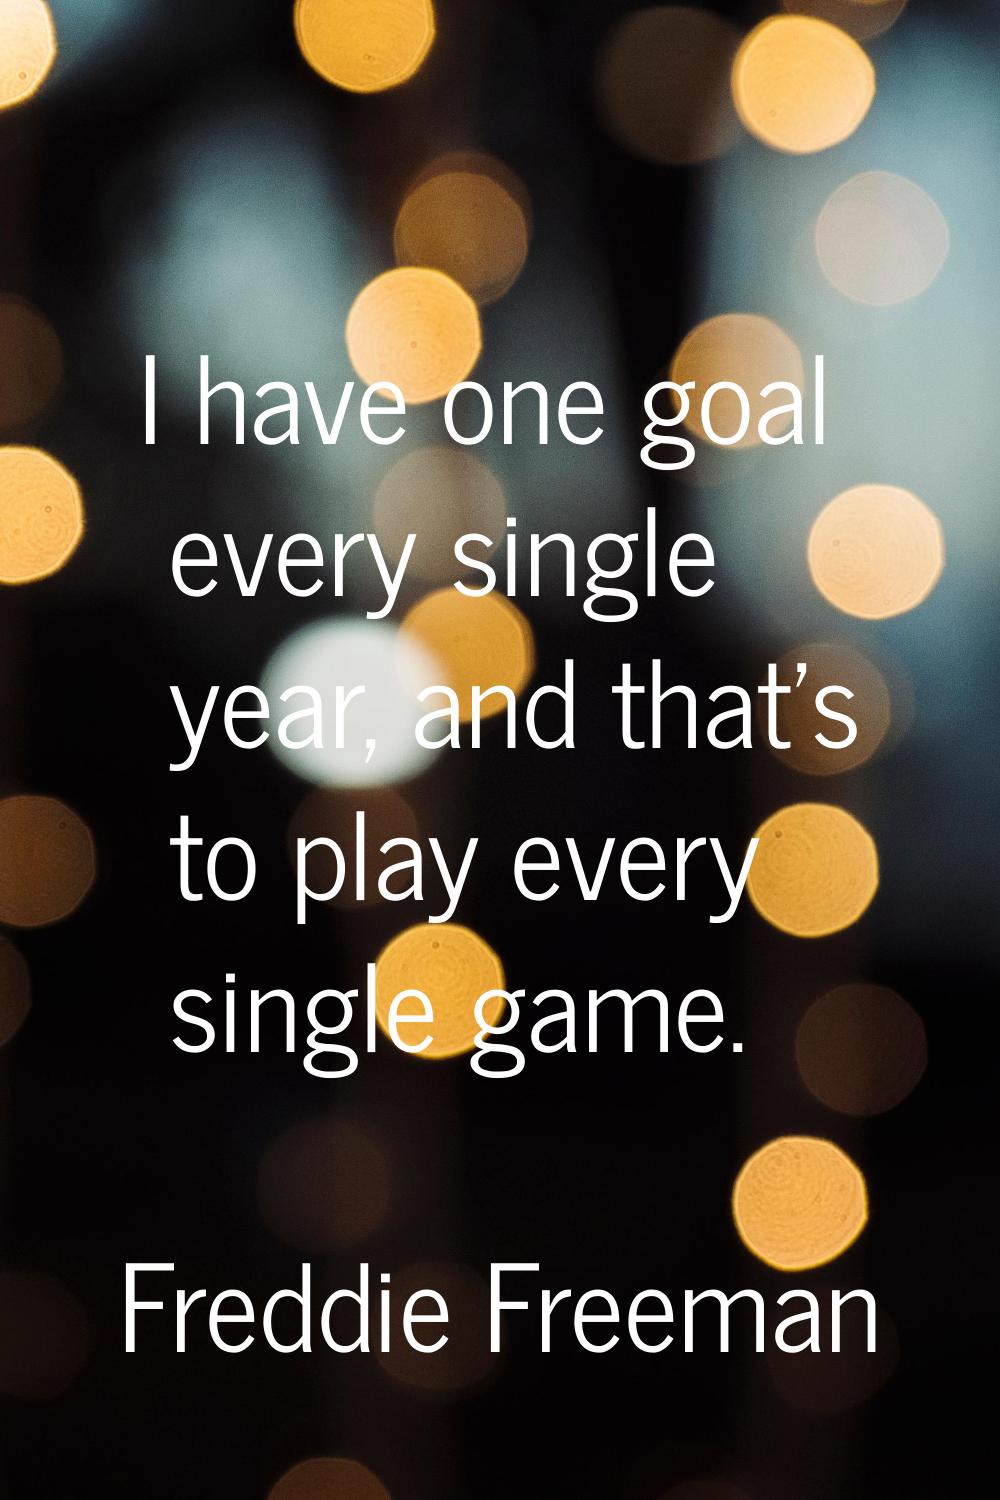 I have one goal every single year, and that's to play every single game.